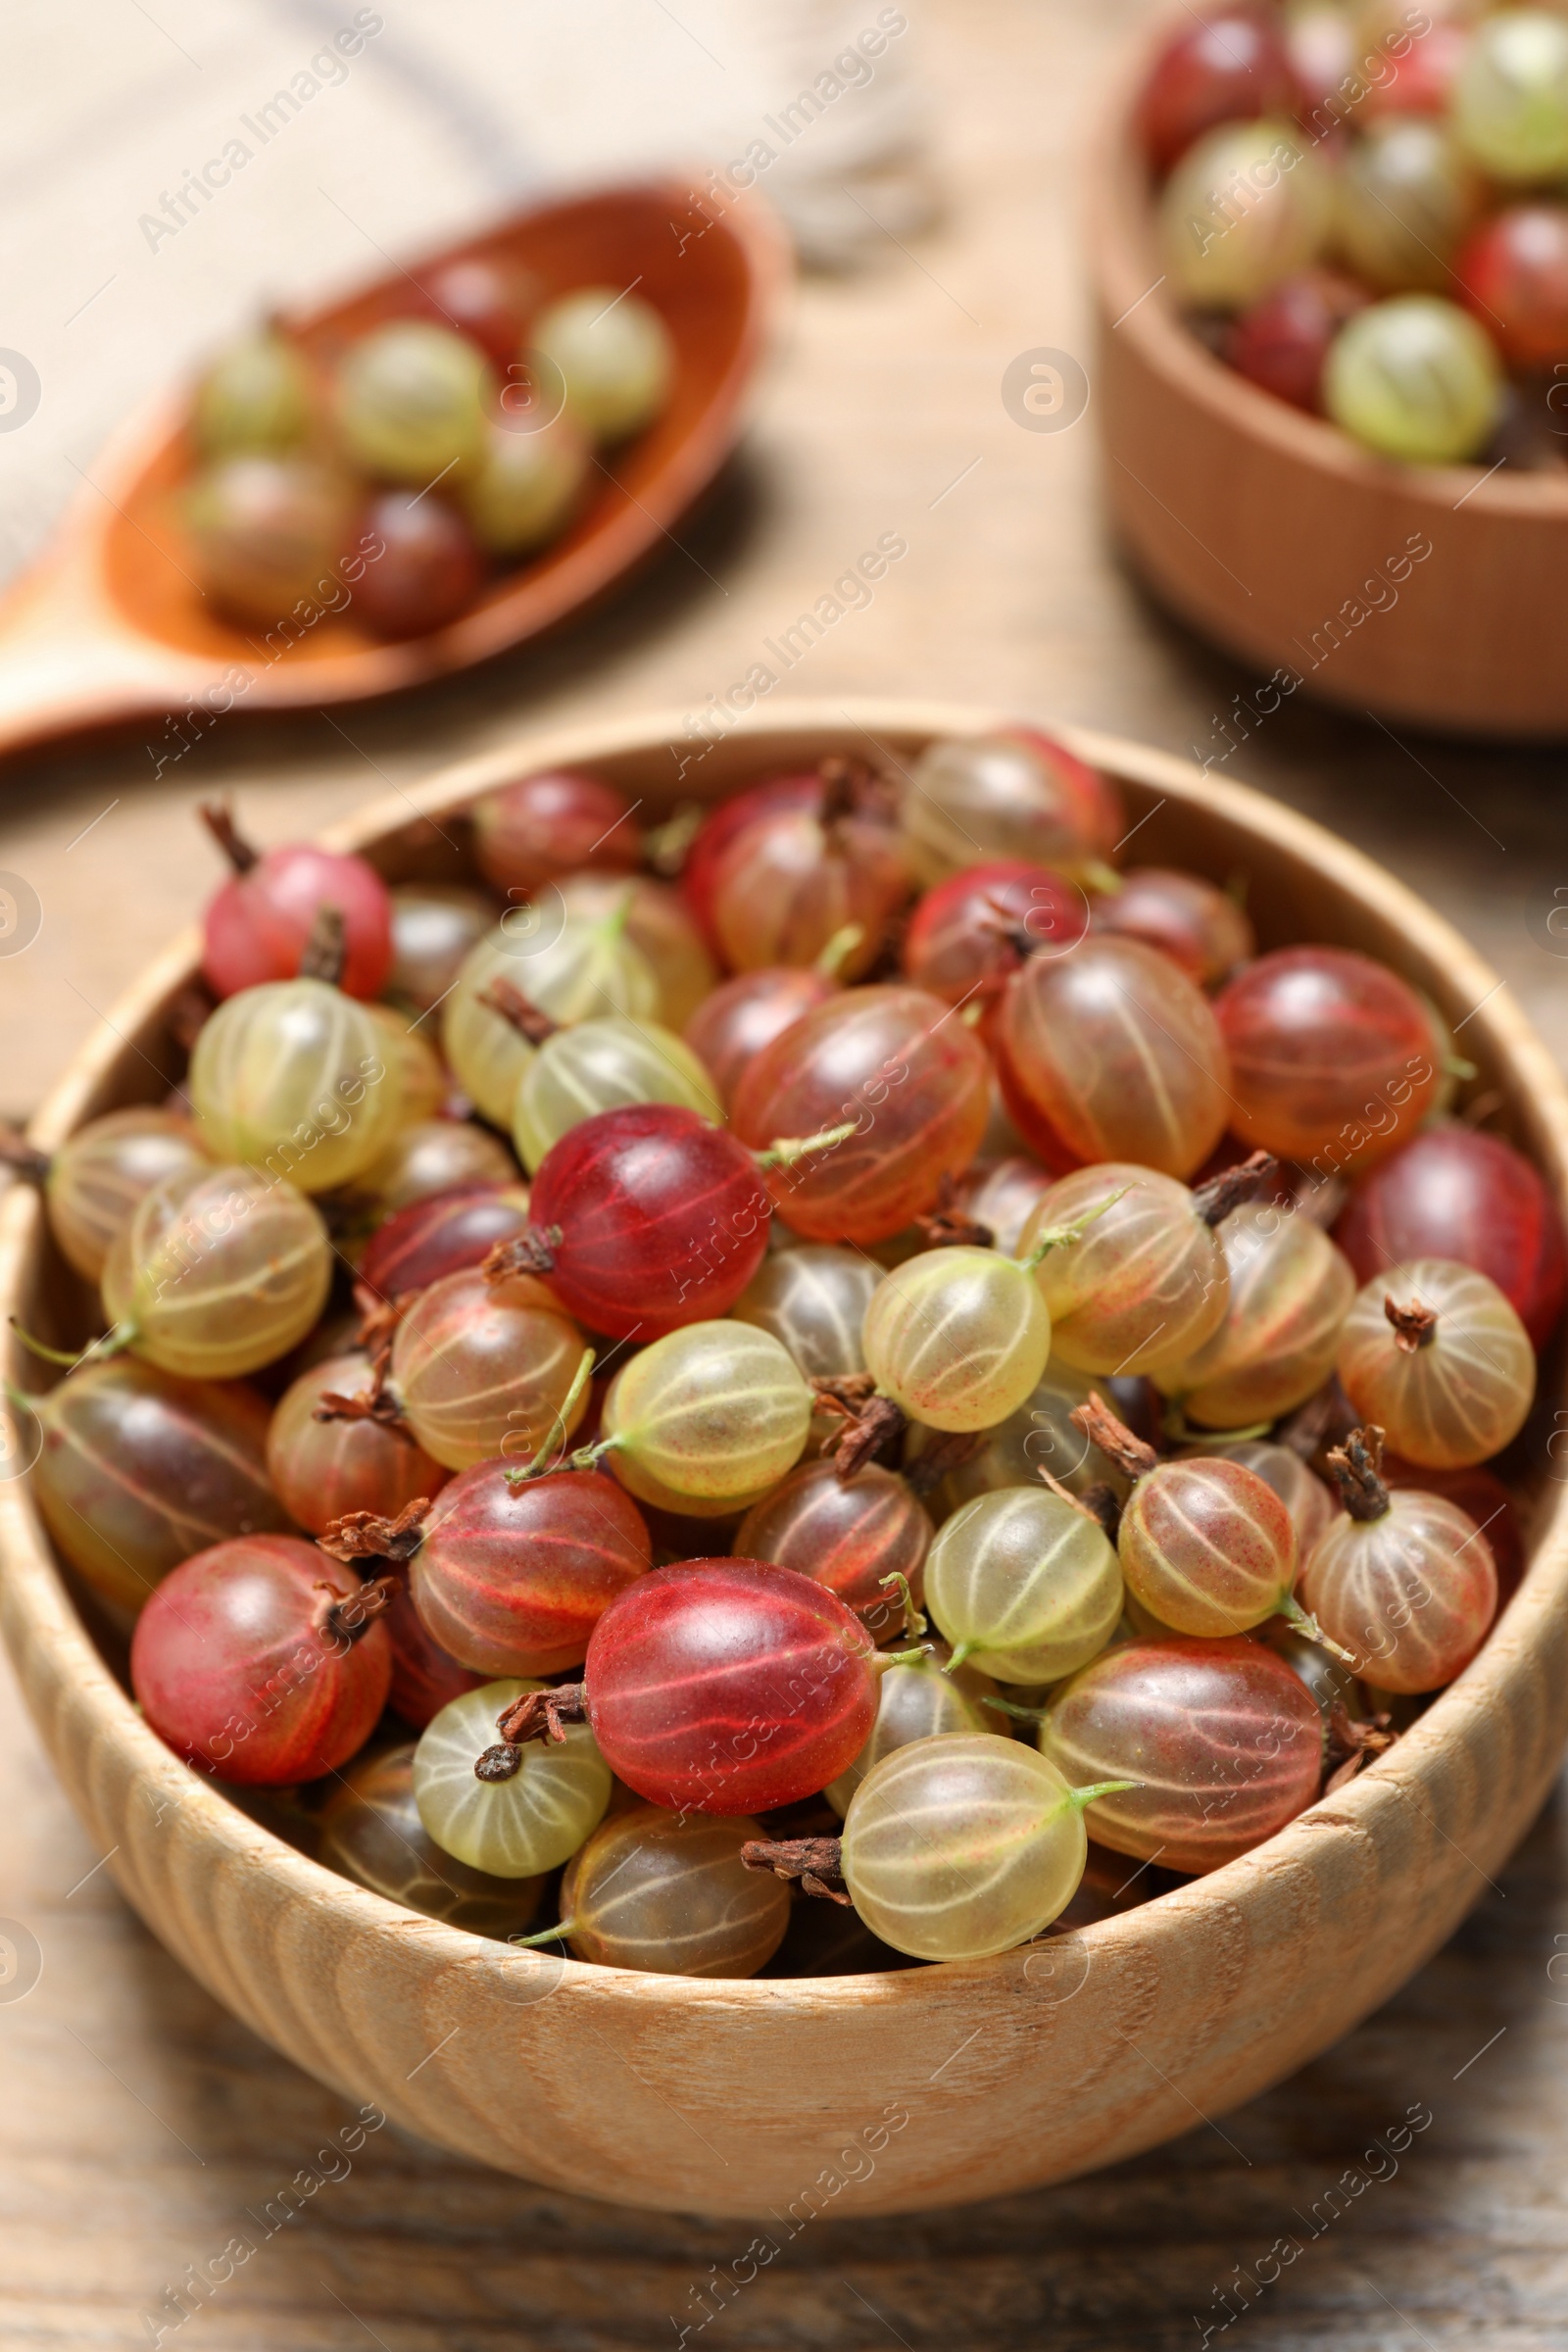 Photo of Bowl of fresh ripe gooseberries on wooden table, closeup